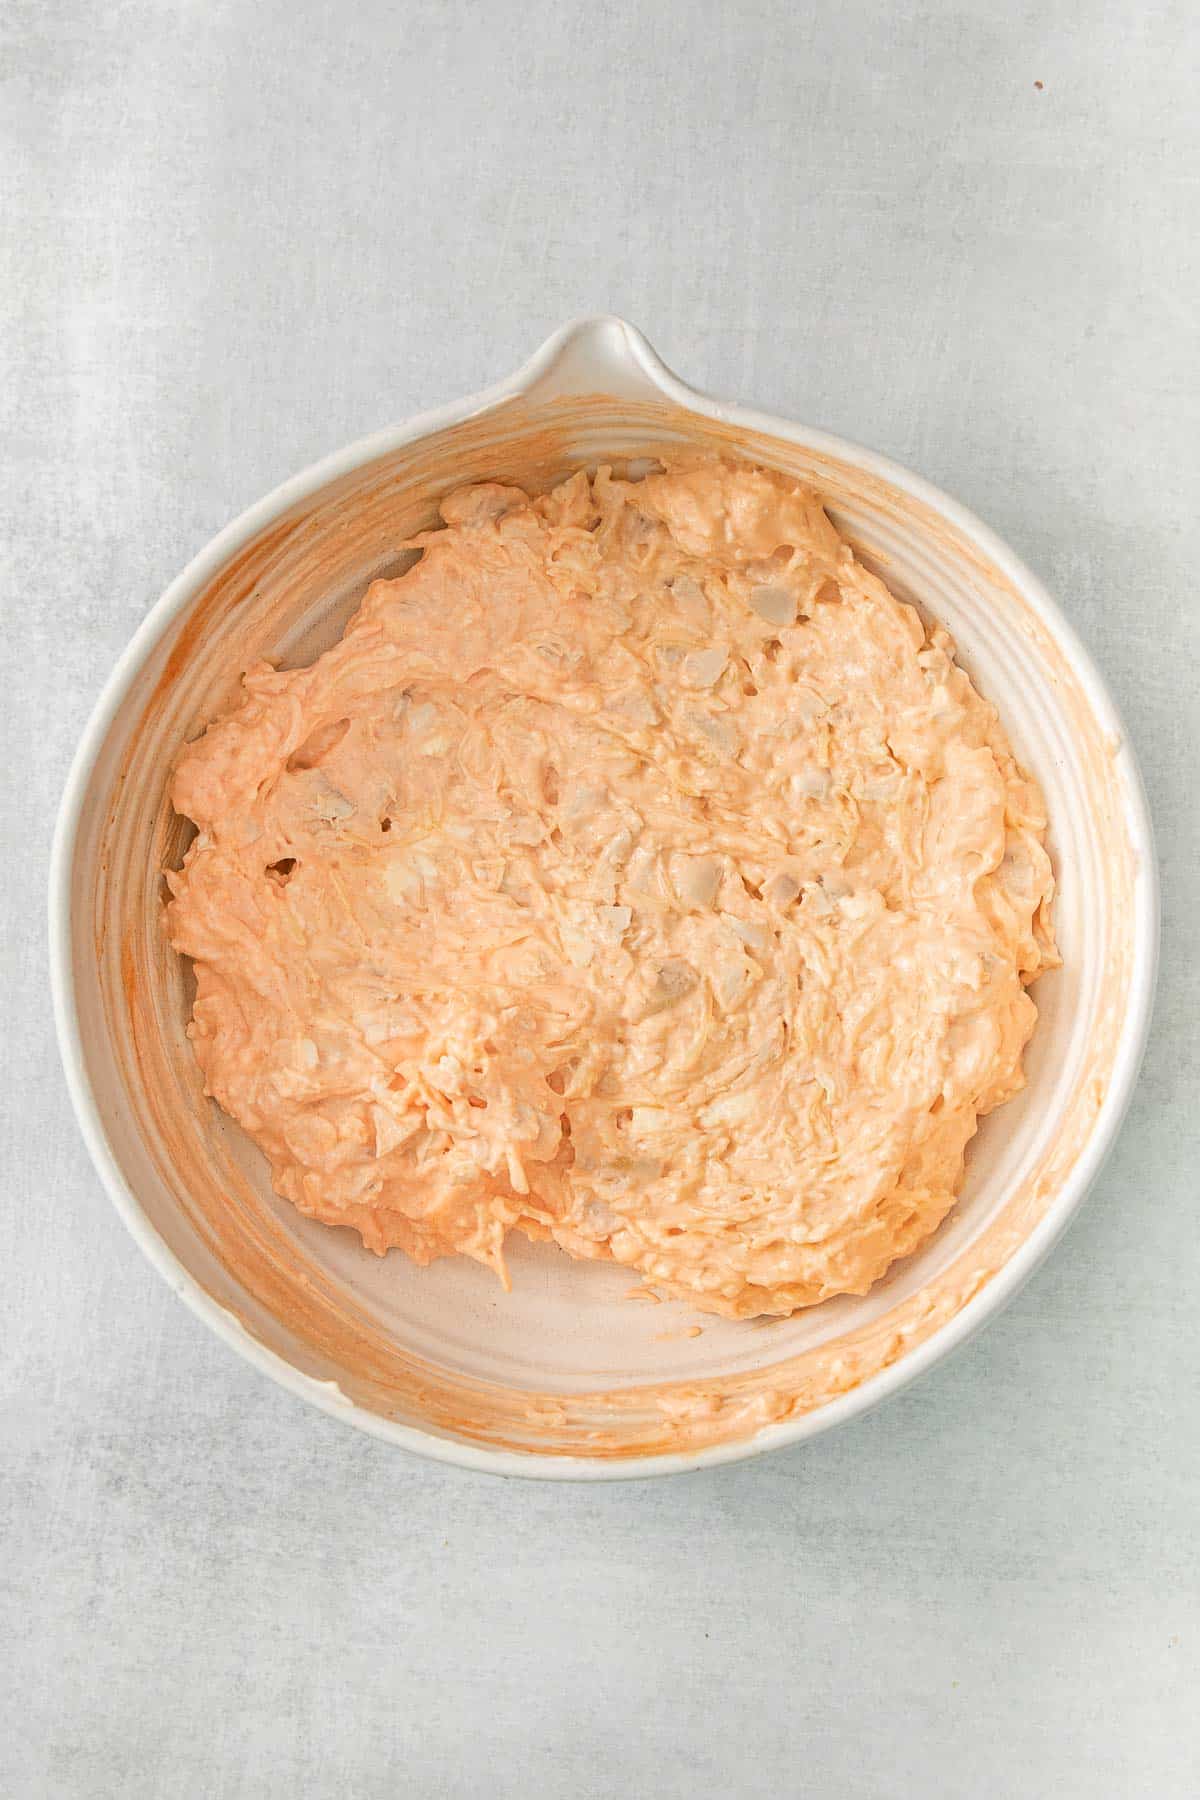 buffalo chicken and cream cheese mixture in a white mixing bowl.